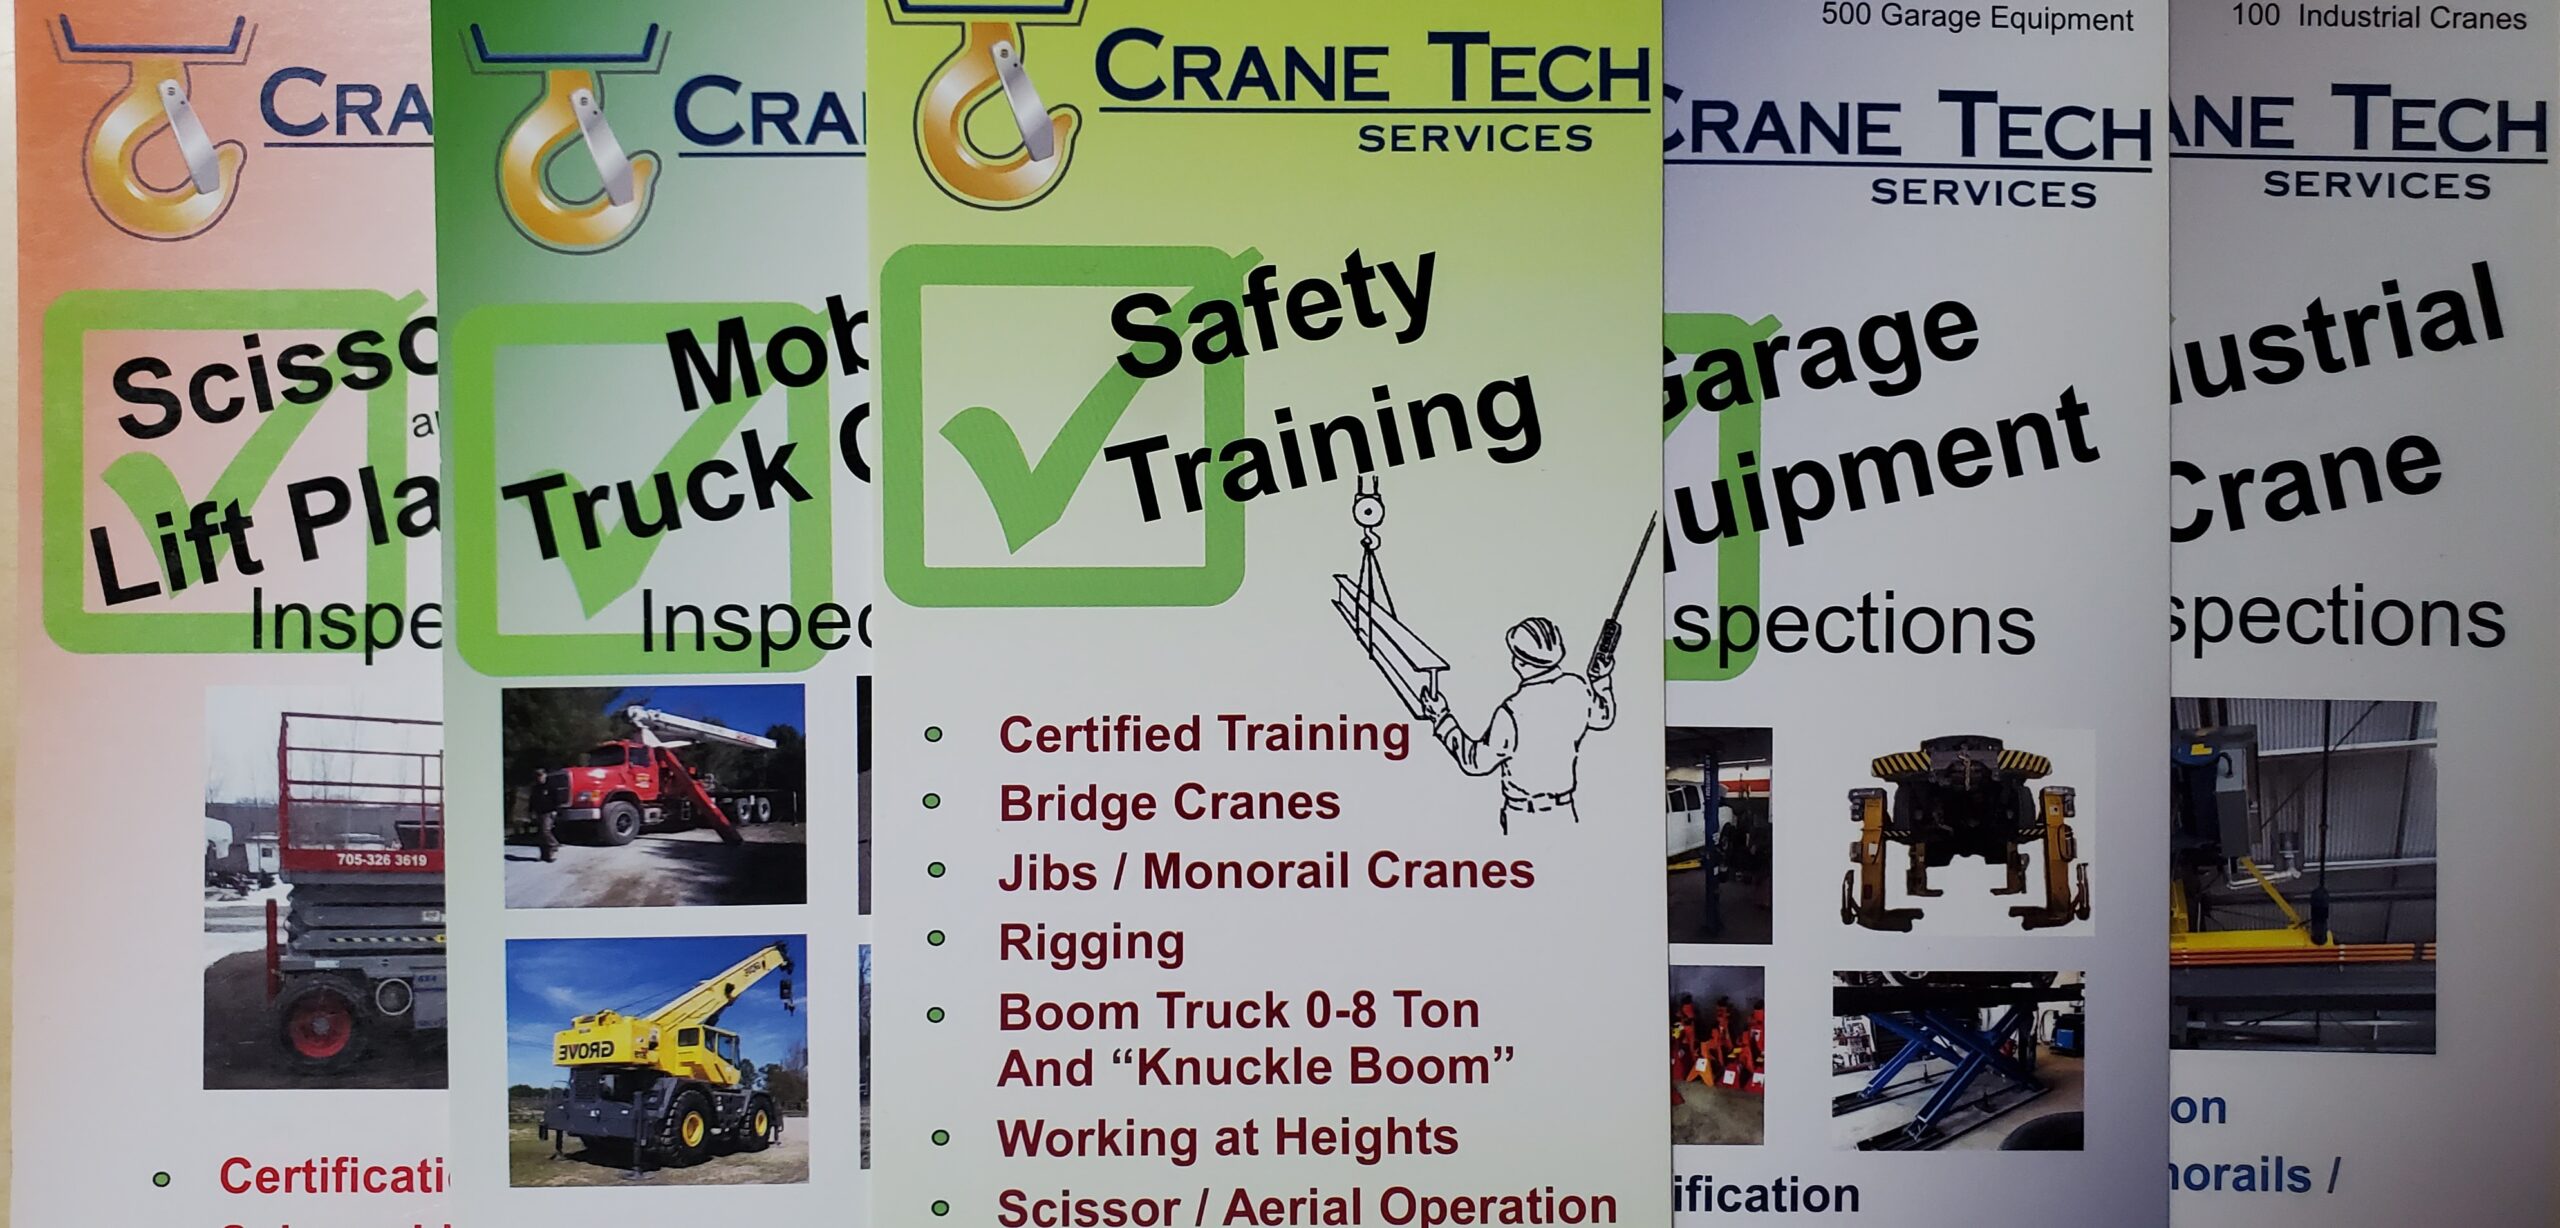 Our Safety Training Services